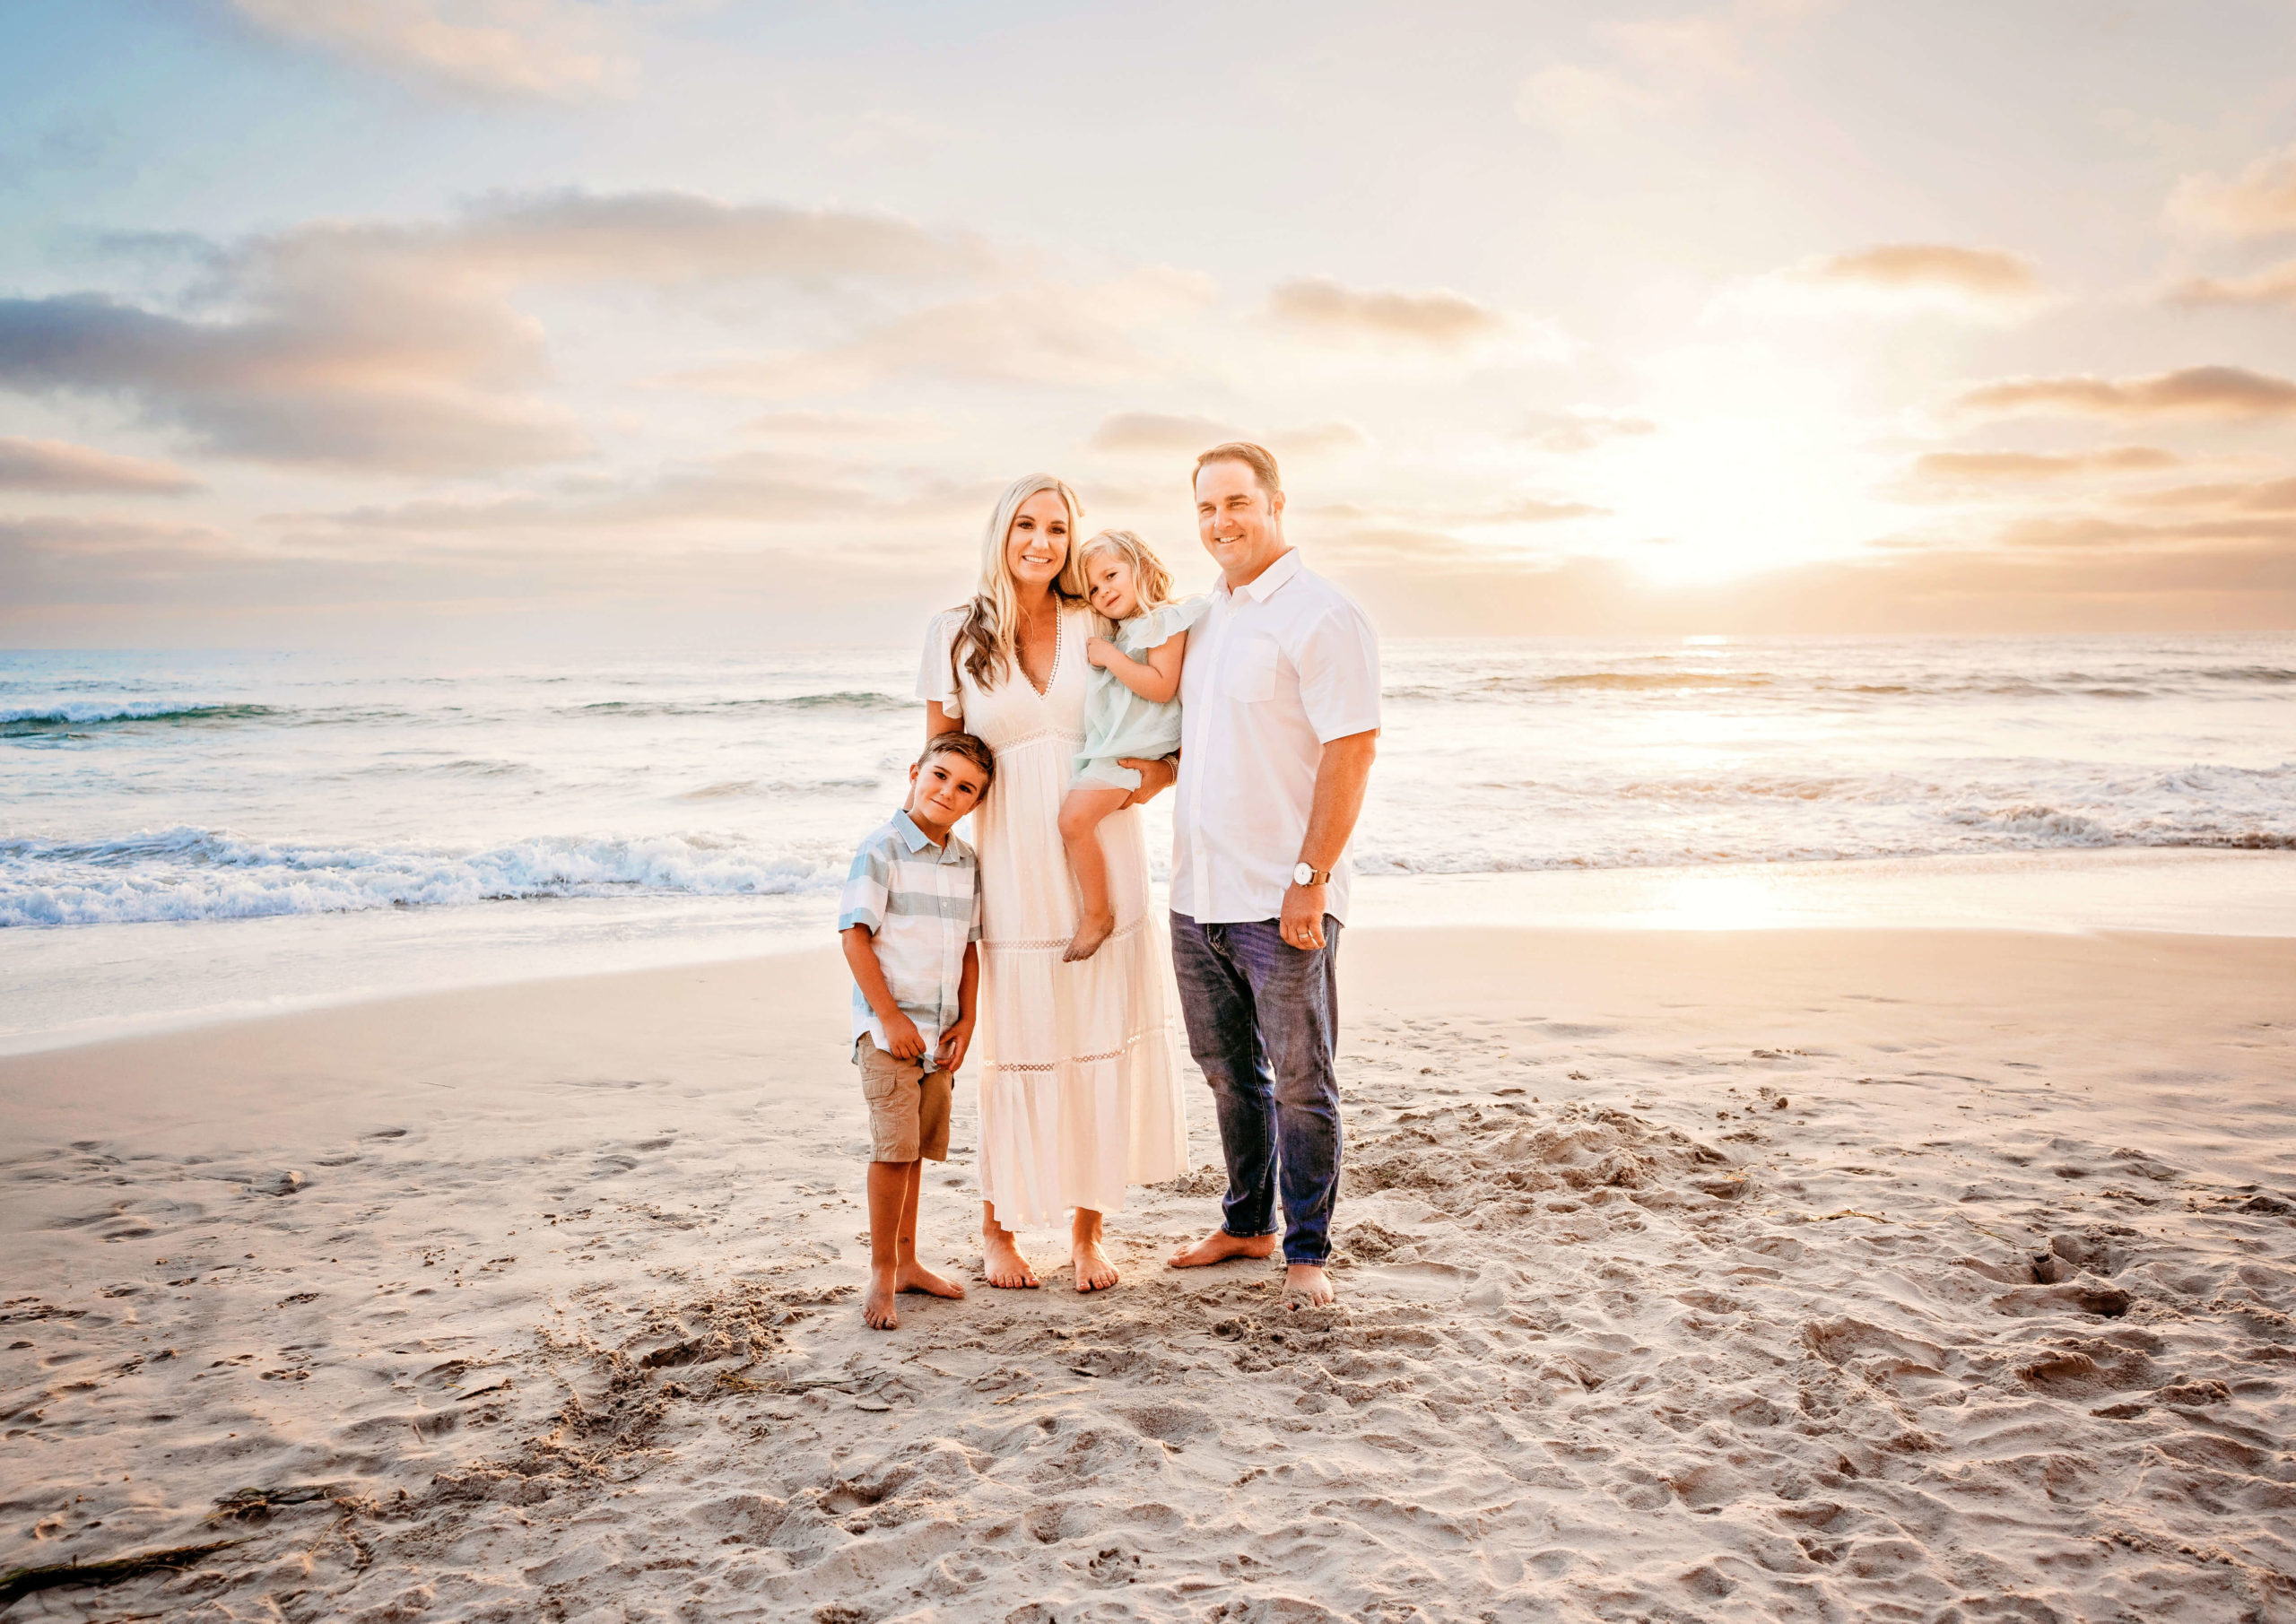 Beautiful family photography session at the beach by Tristan Quigley Photography